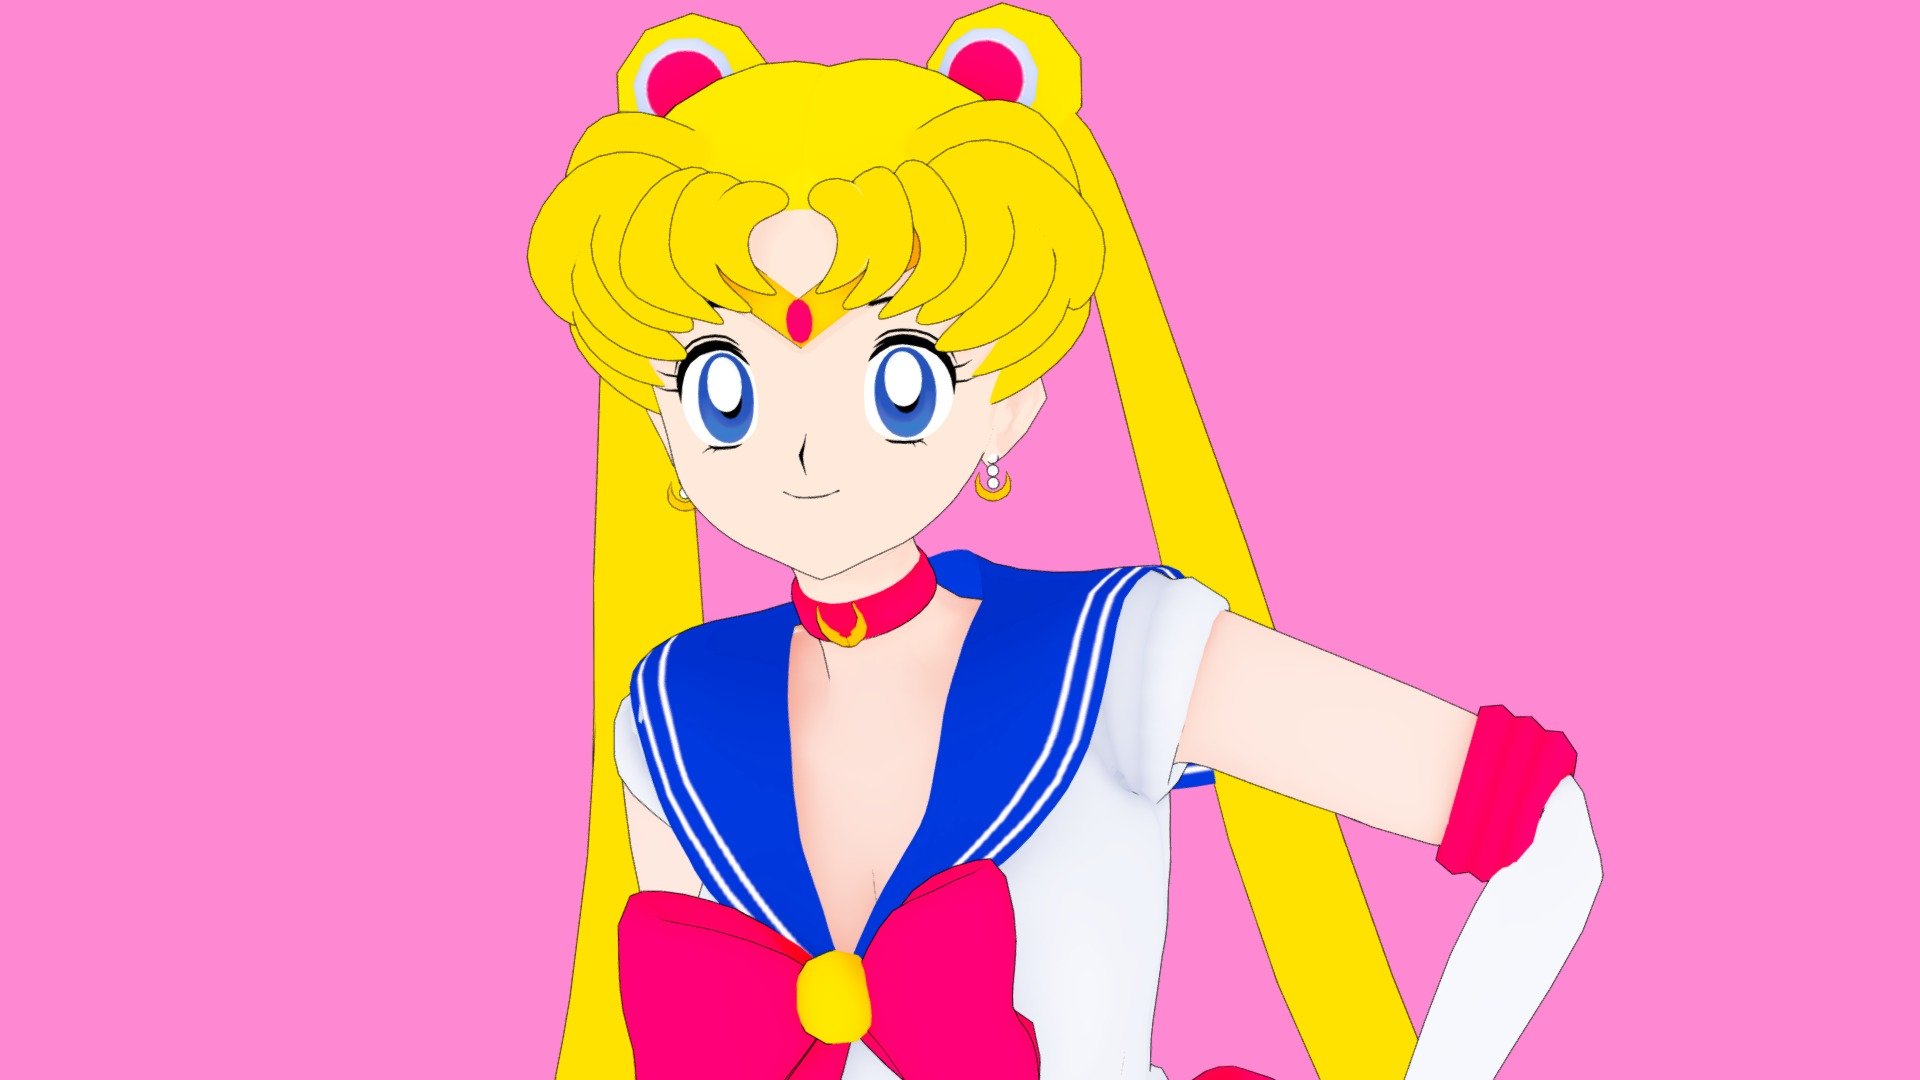 Sailor Moon! She's available on my Gumroad! - Sailor Moon - 3D model by CutieCustard 3d model